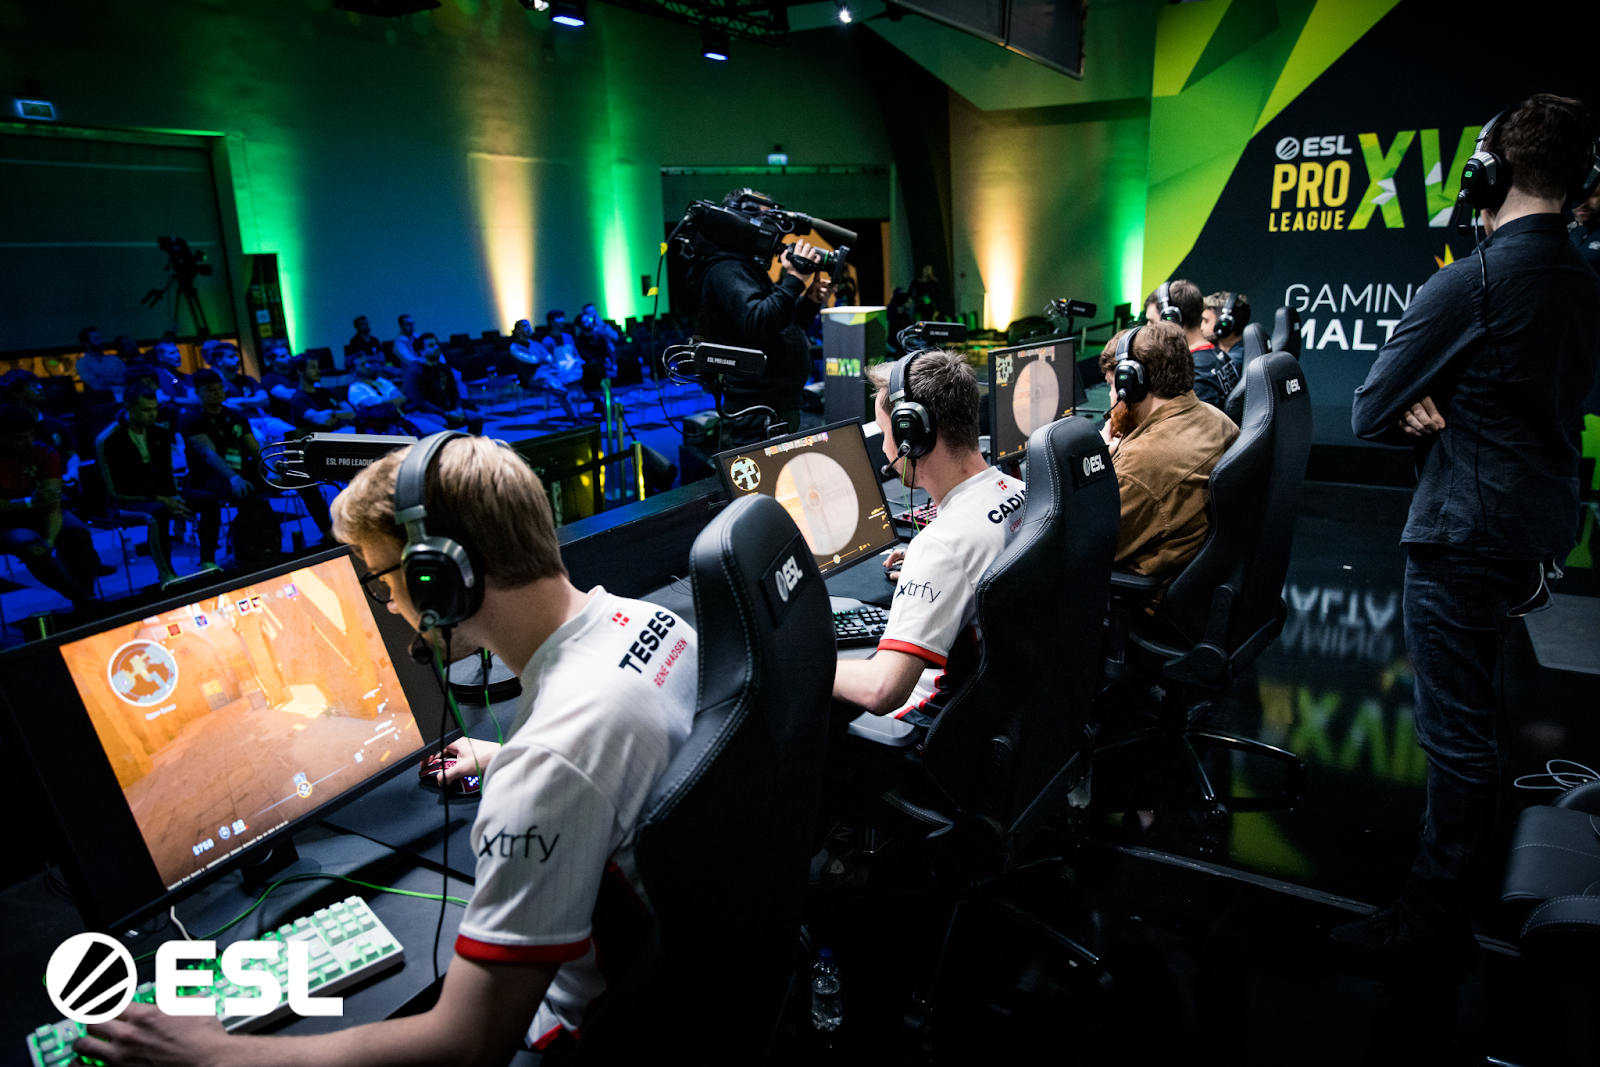 By winning ESL Pro League Season 17, FaZe Clan completes the Intel® Grand Slam, writing themselves into the esports history books